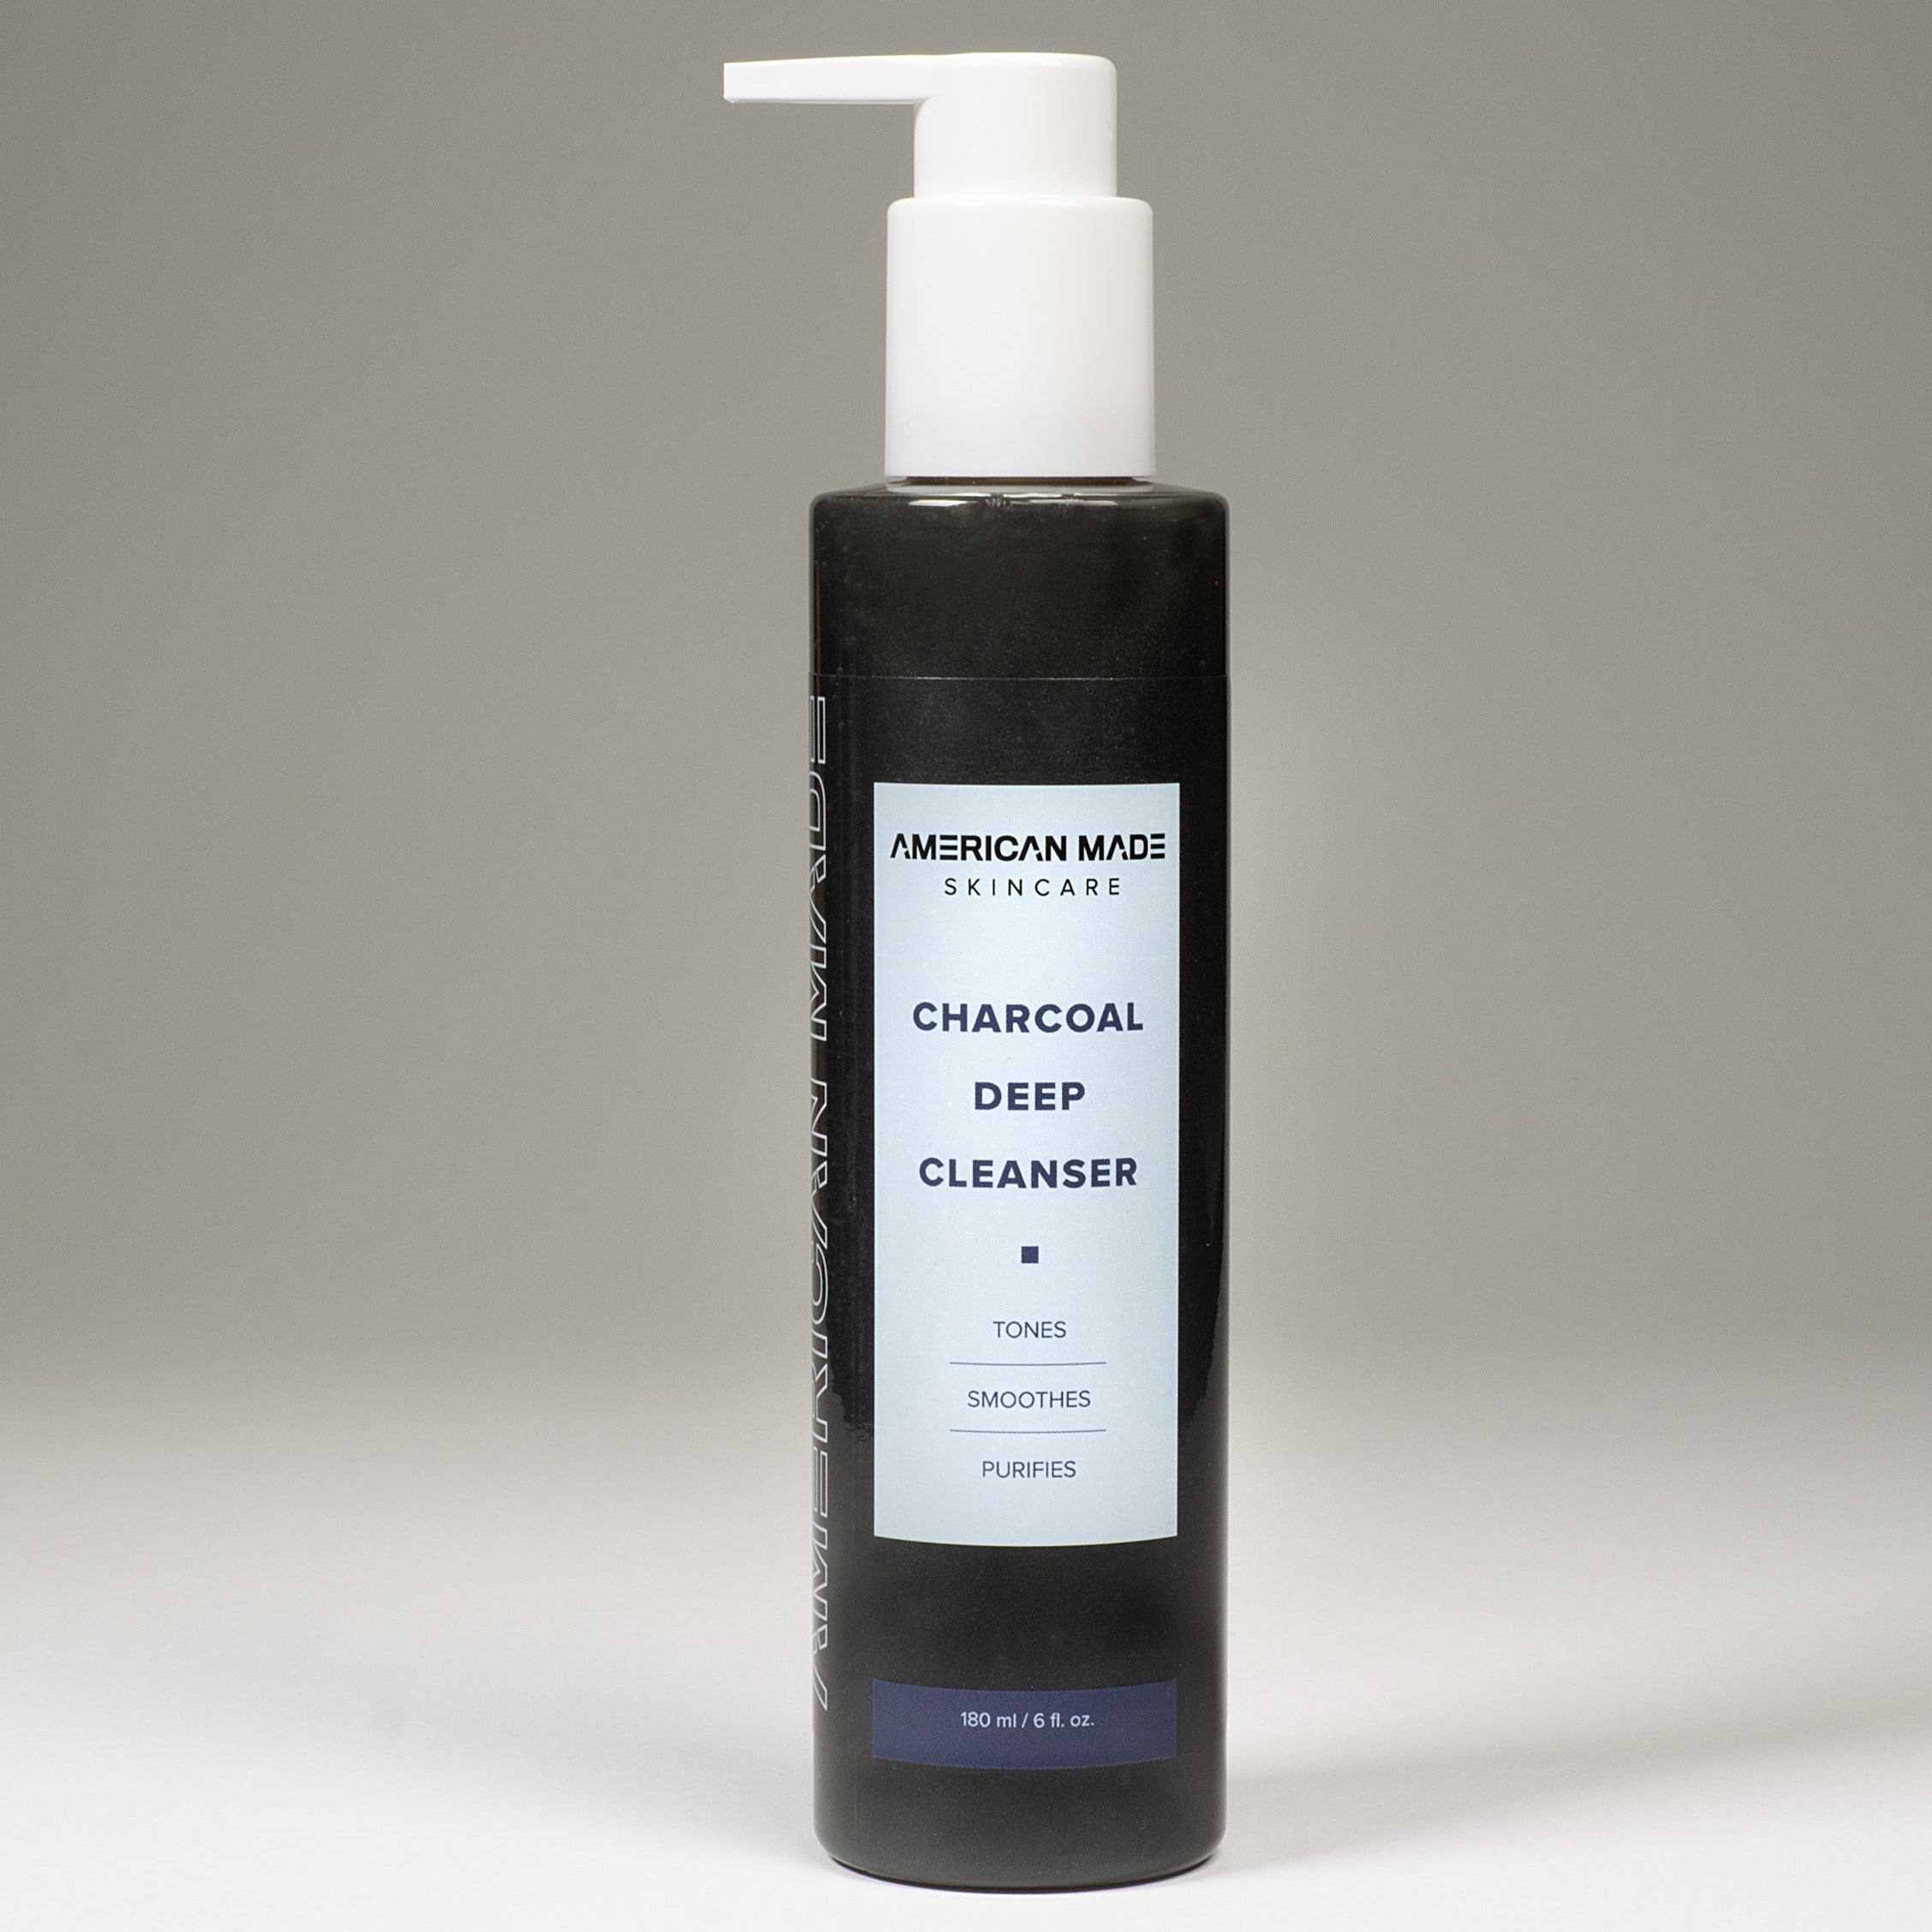 Charcoal Deep Cleanser